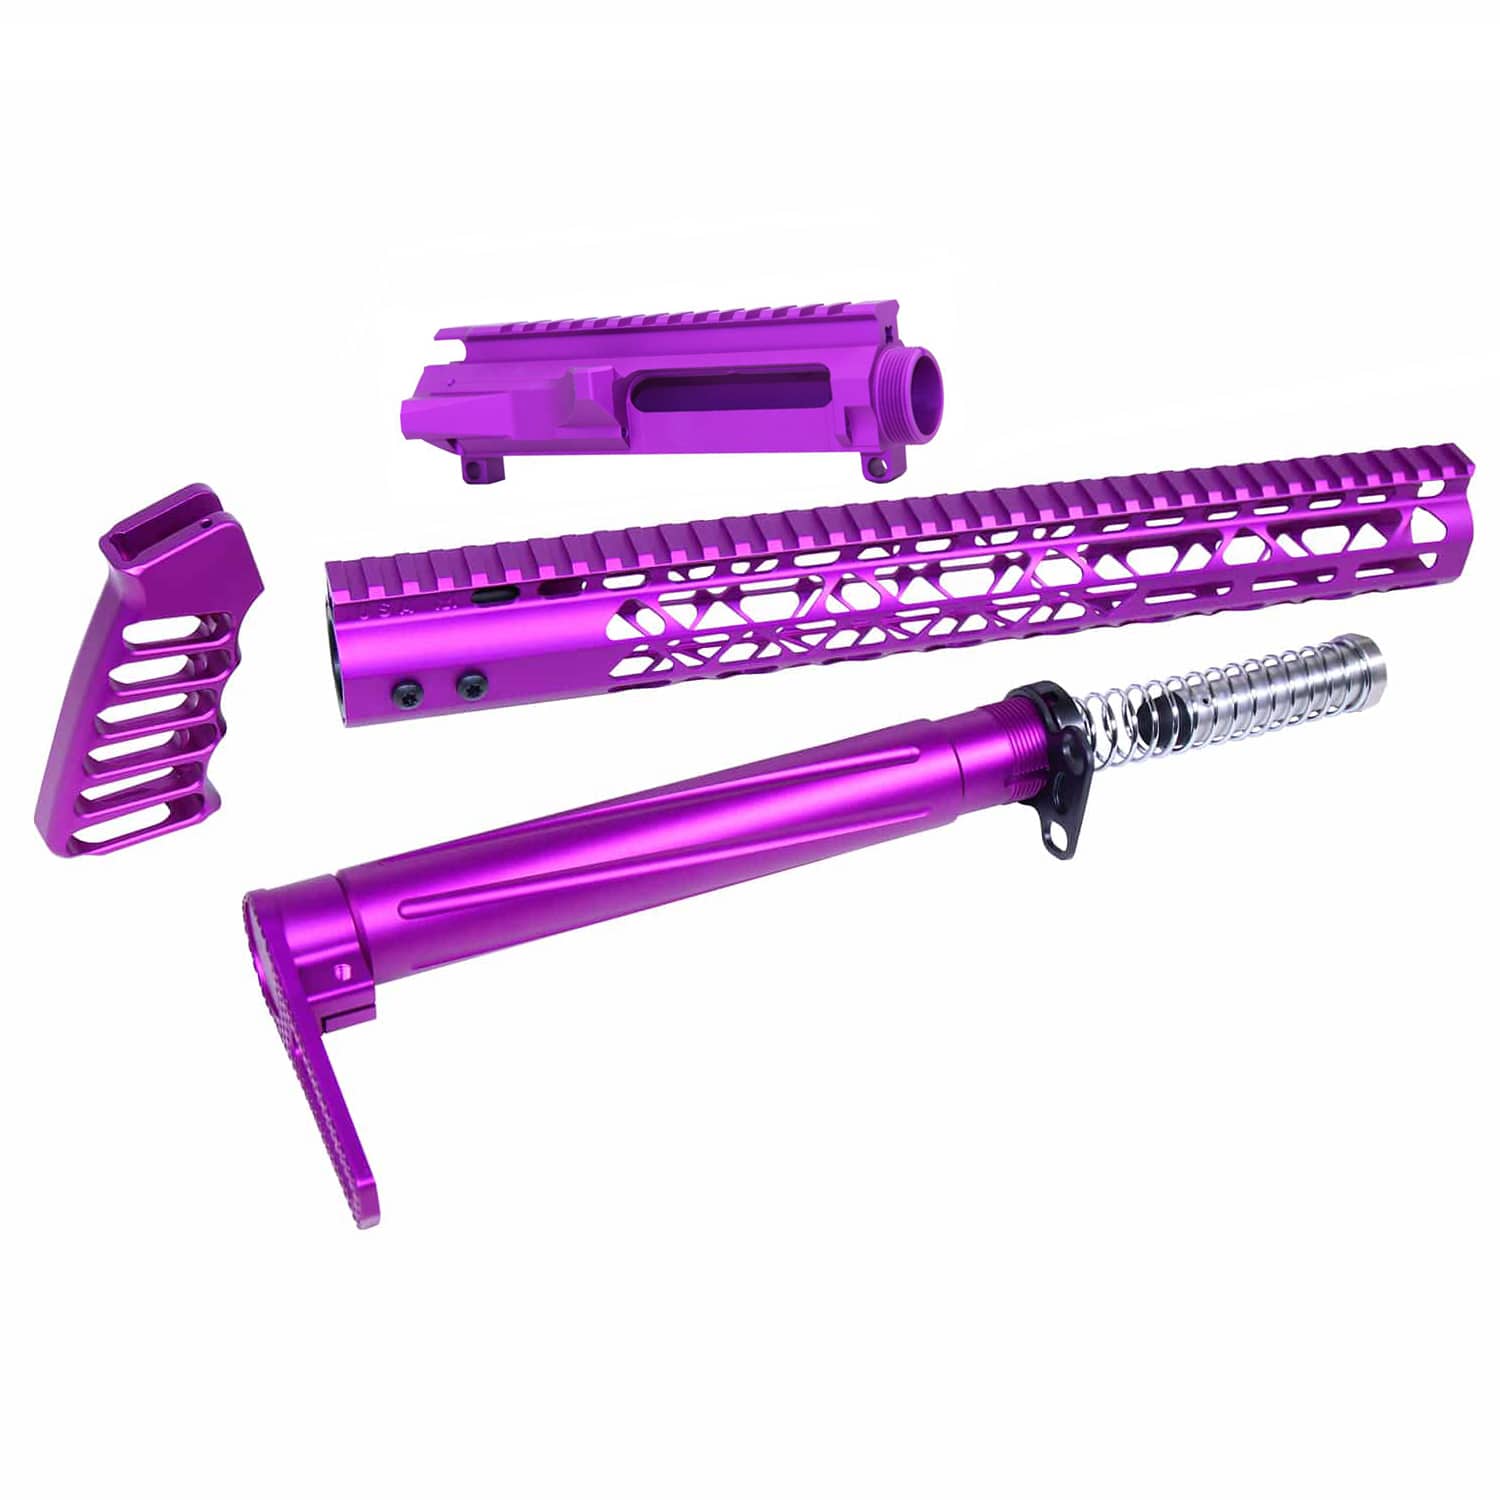 AR-15 Airlite Series furniture set and upper receiver in purple anodized finish.